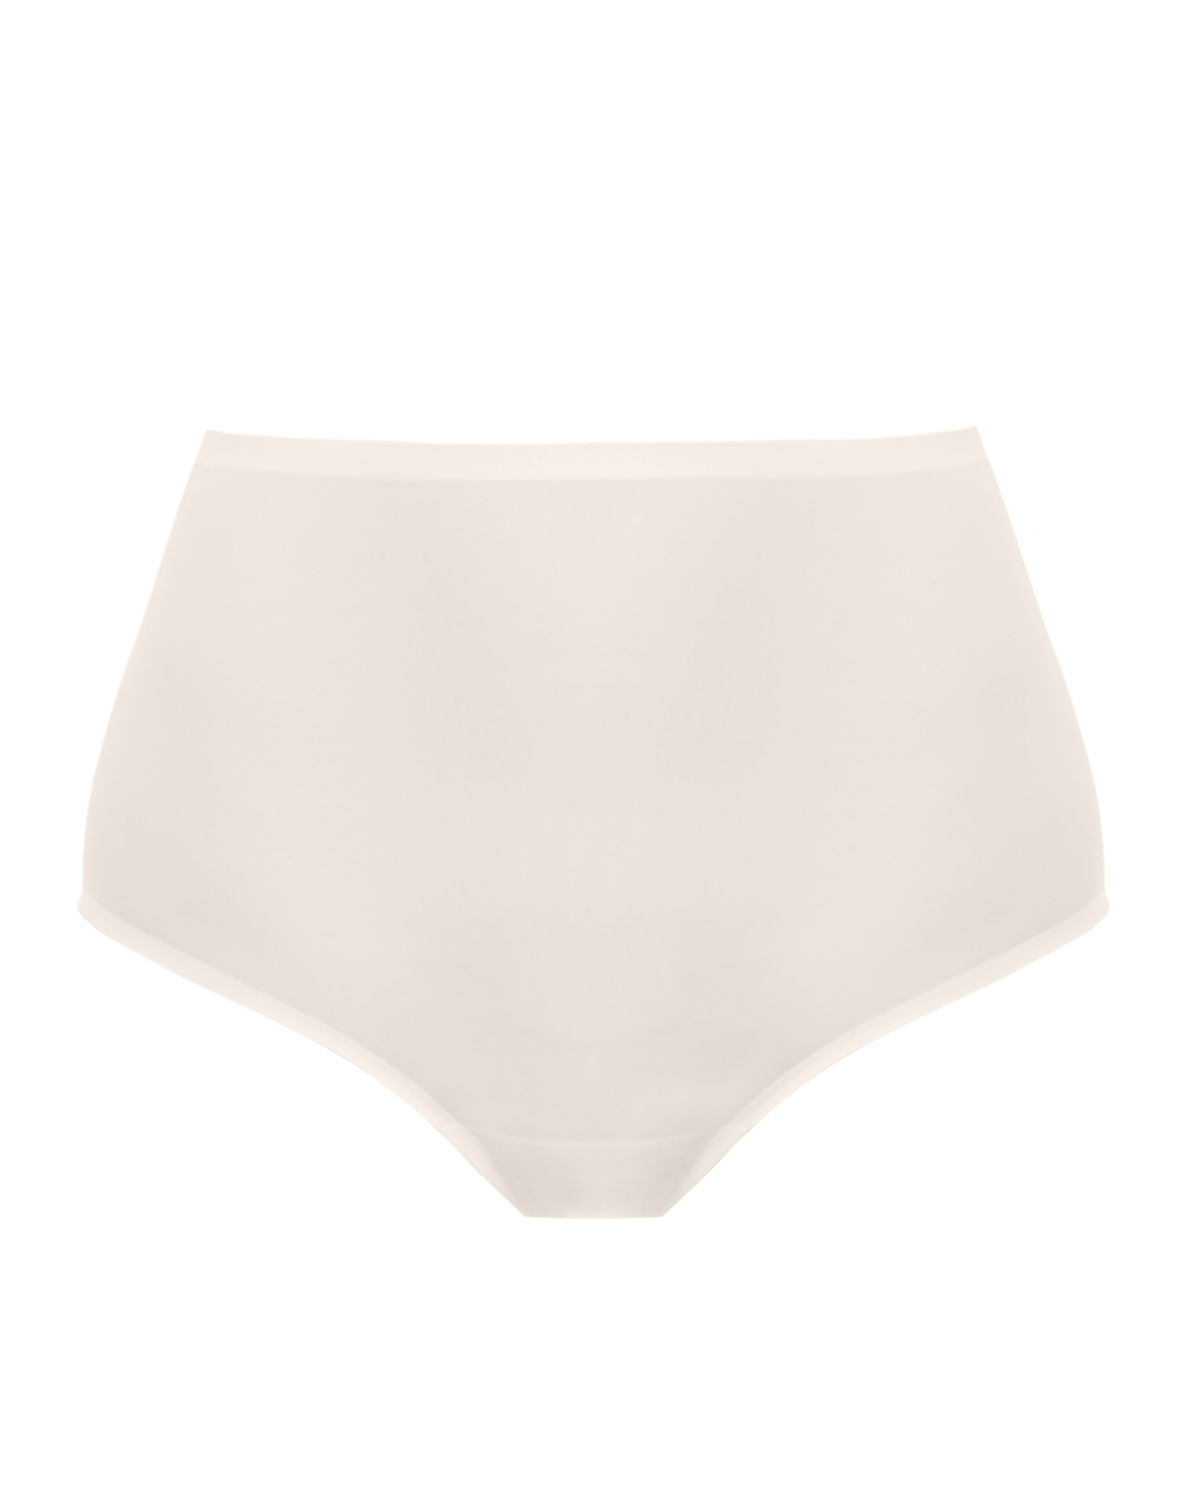 Flat lay of a seamless stretch full brief in white